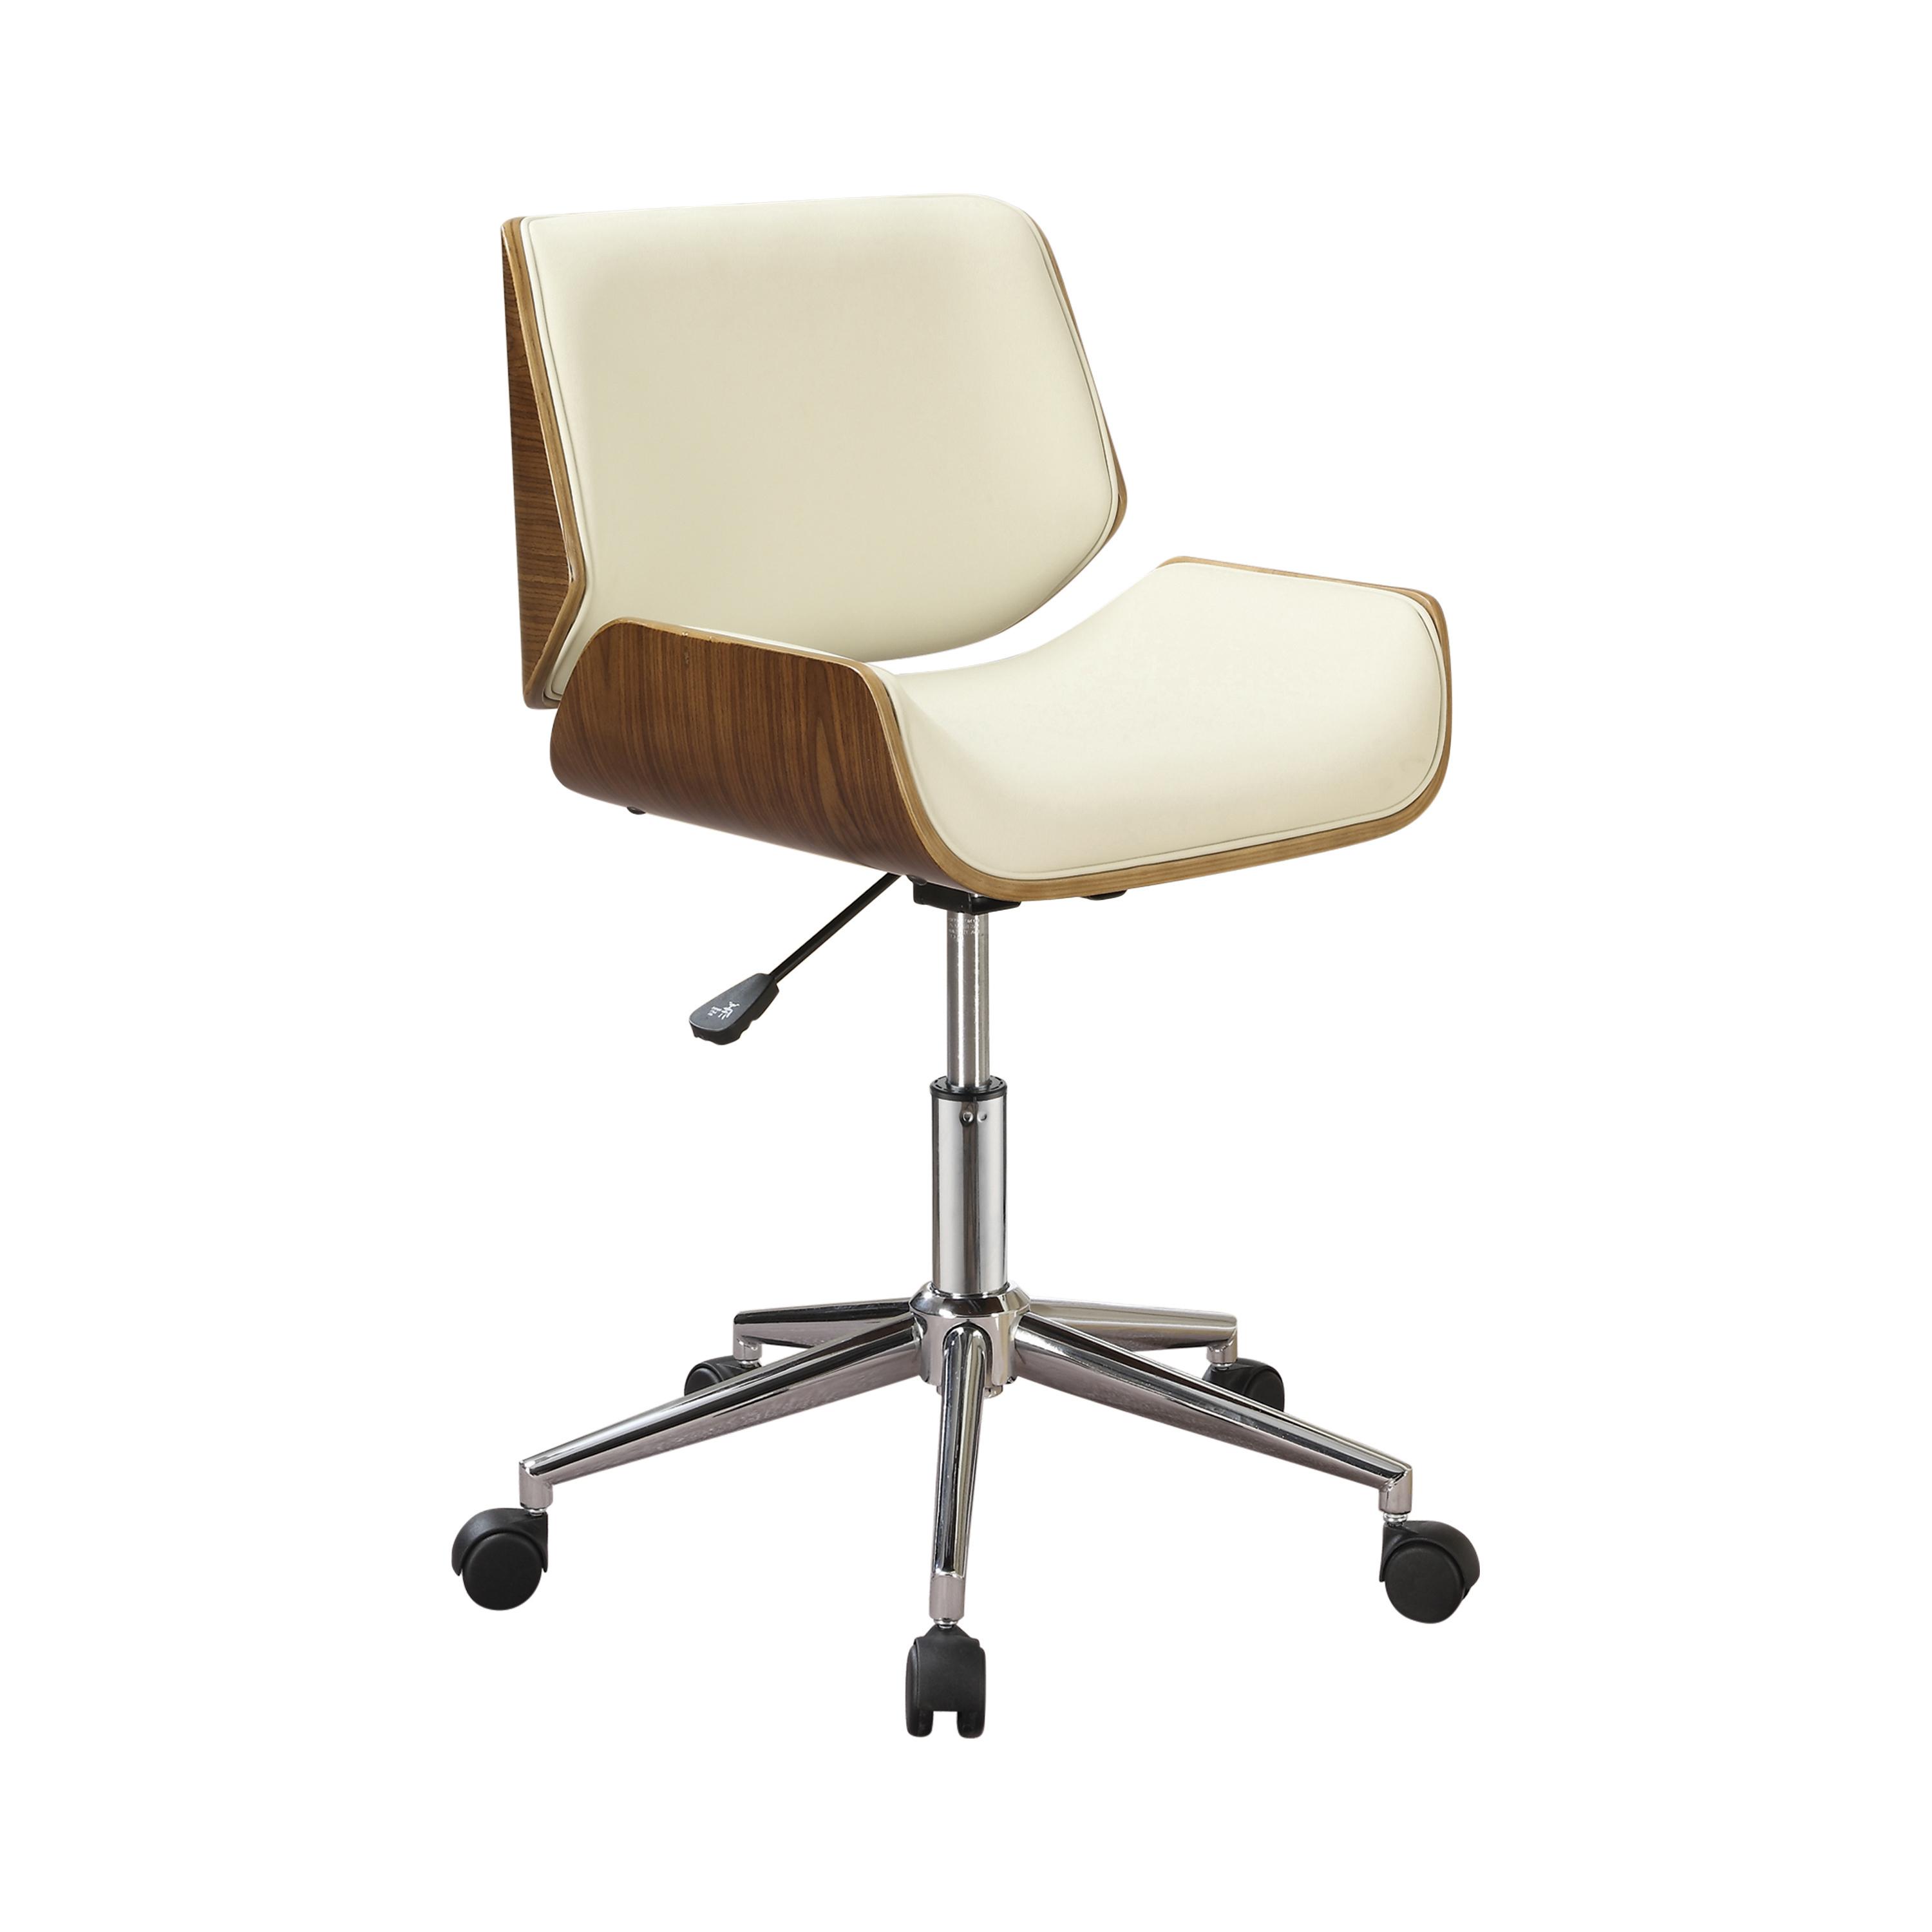 Modern Office Chair 800613 800613 in Cream Leatherette